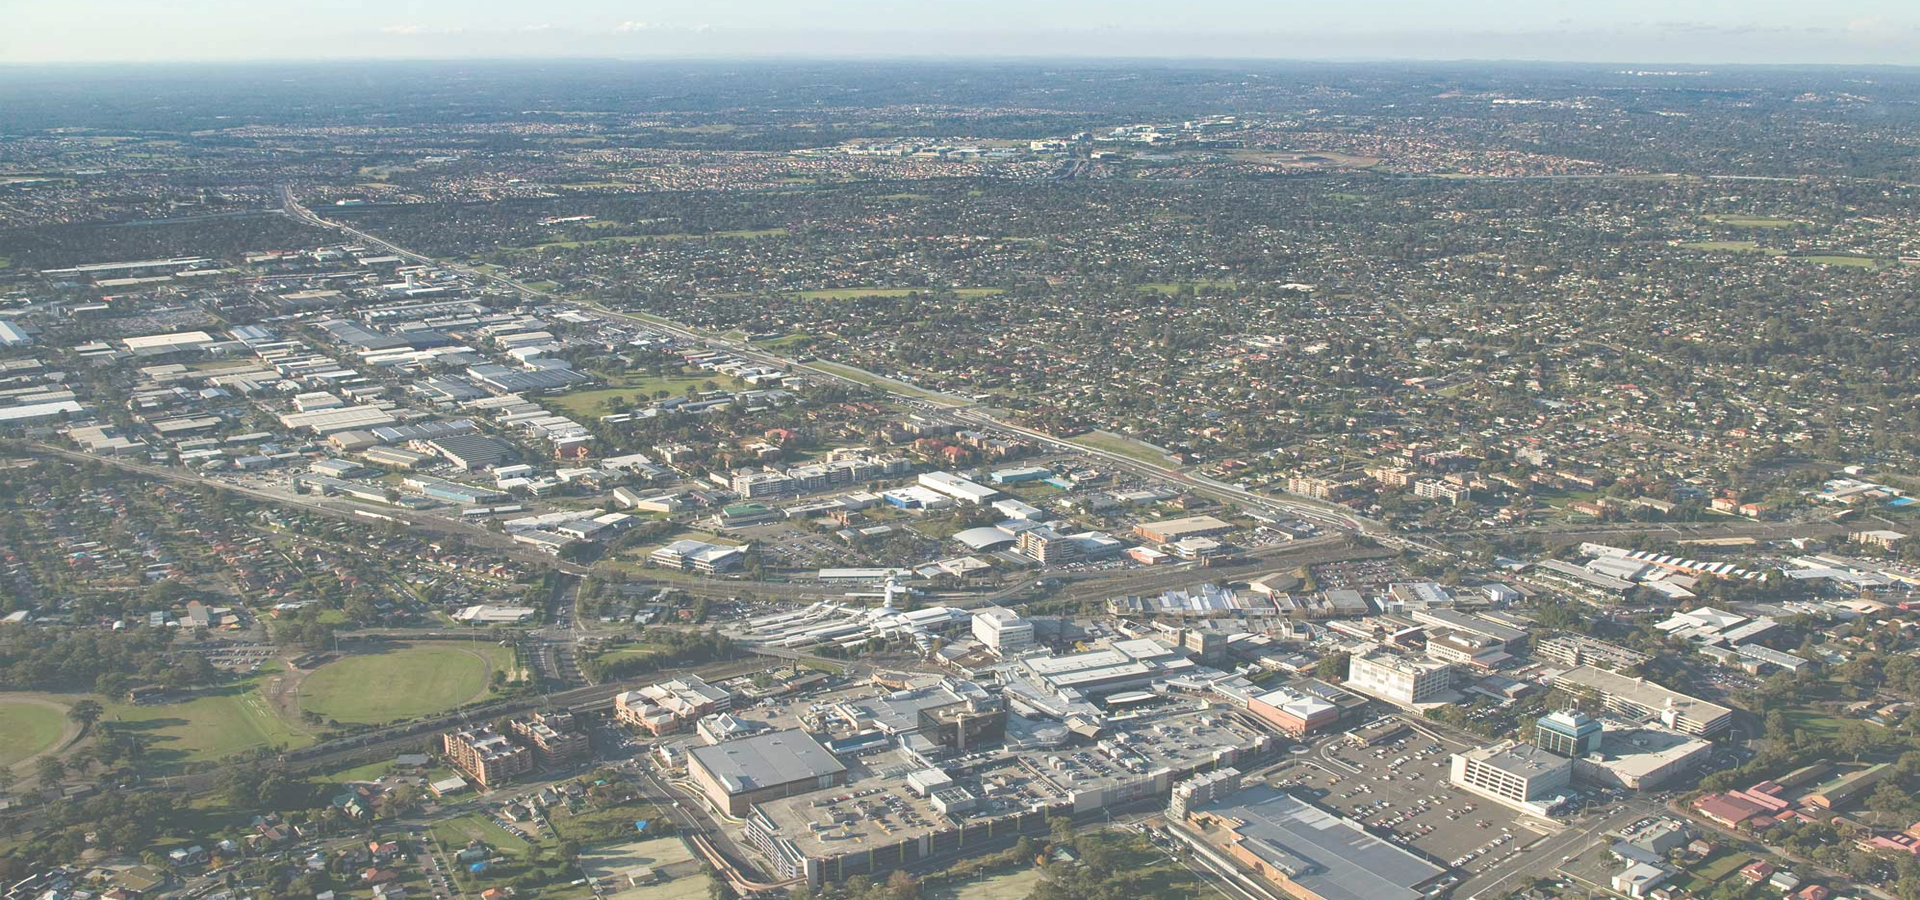 Blacktown, New South Wales